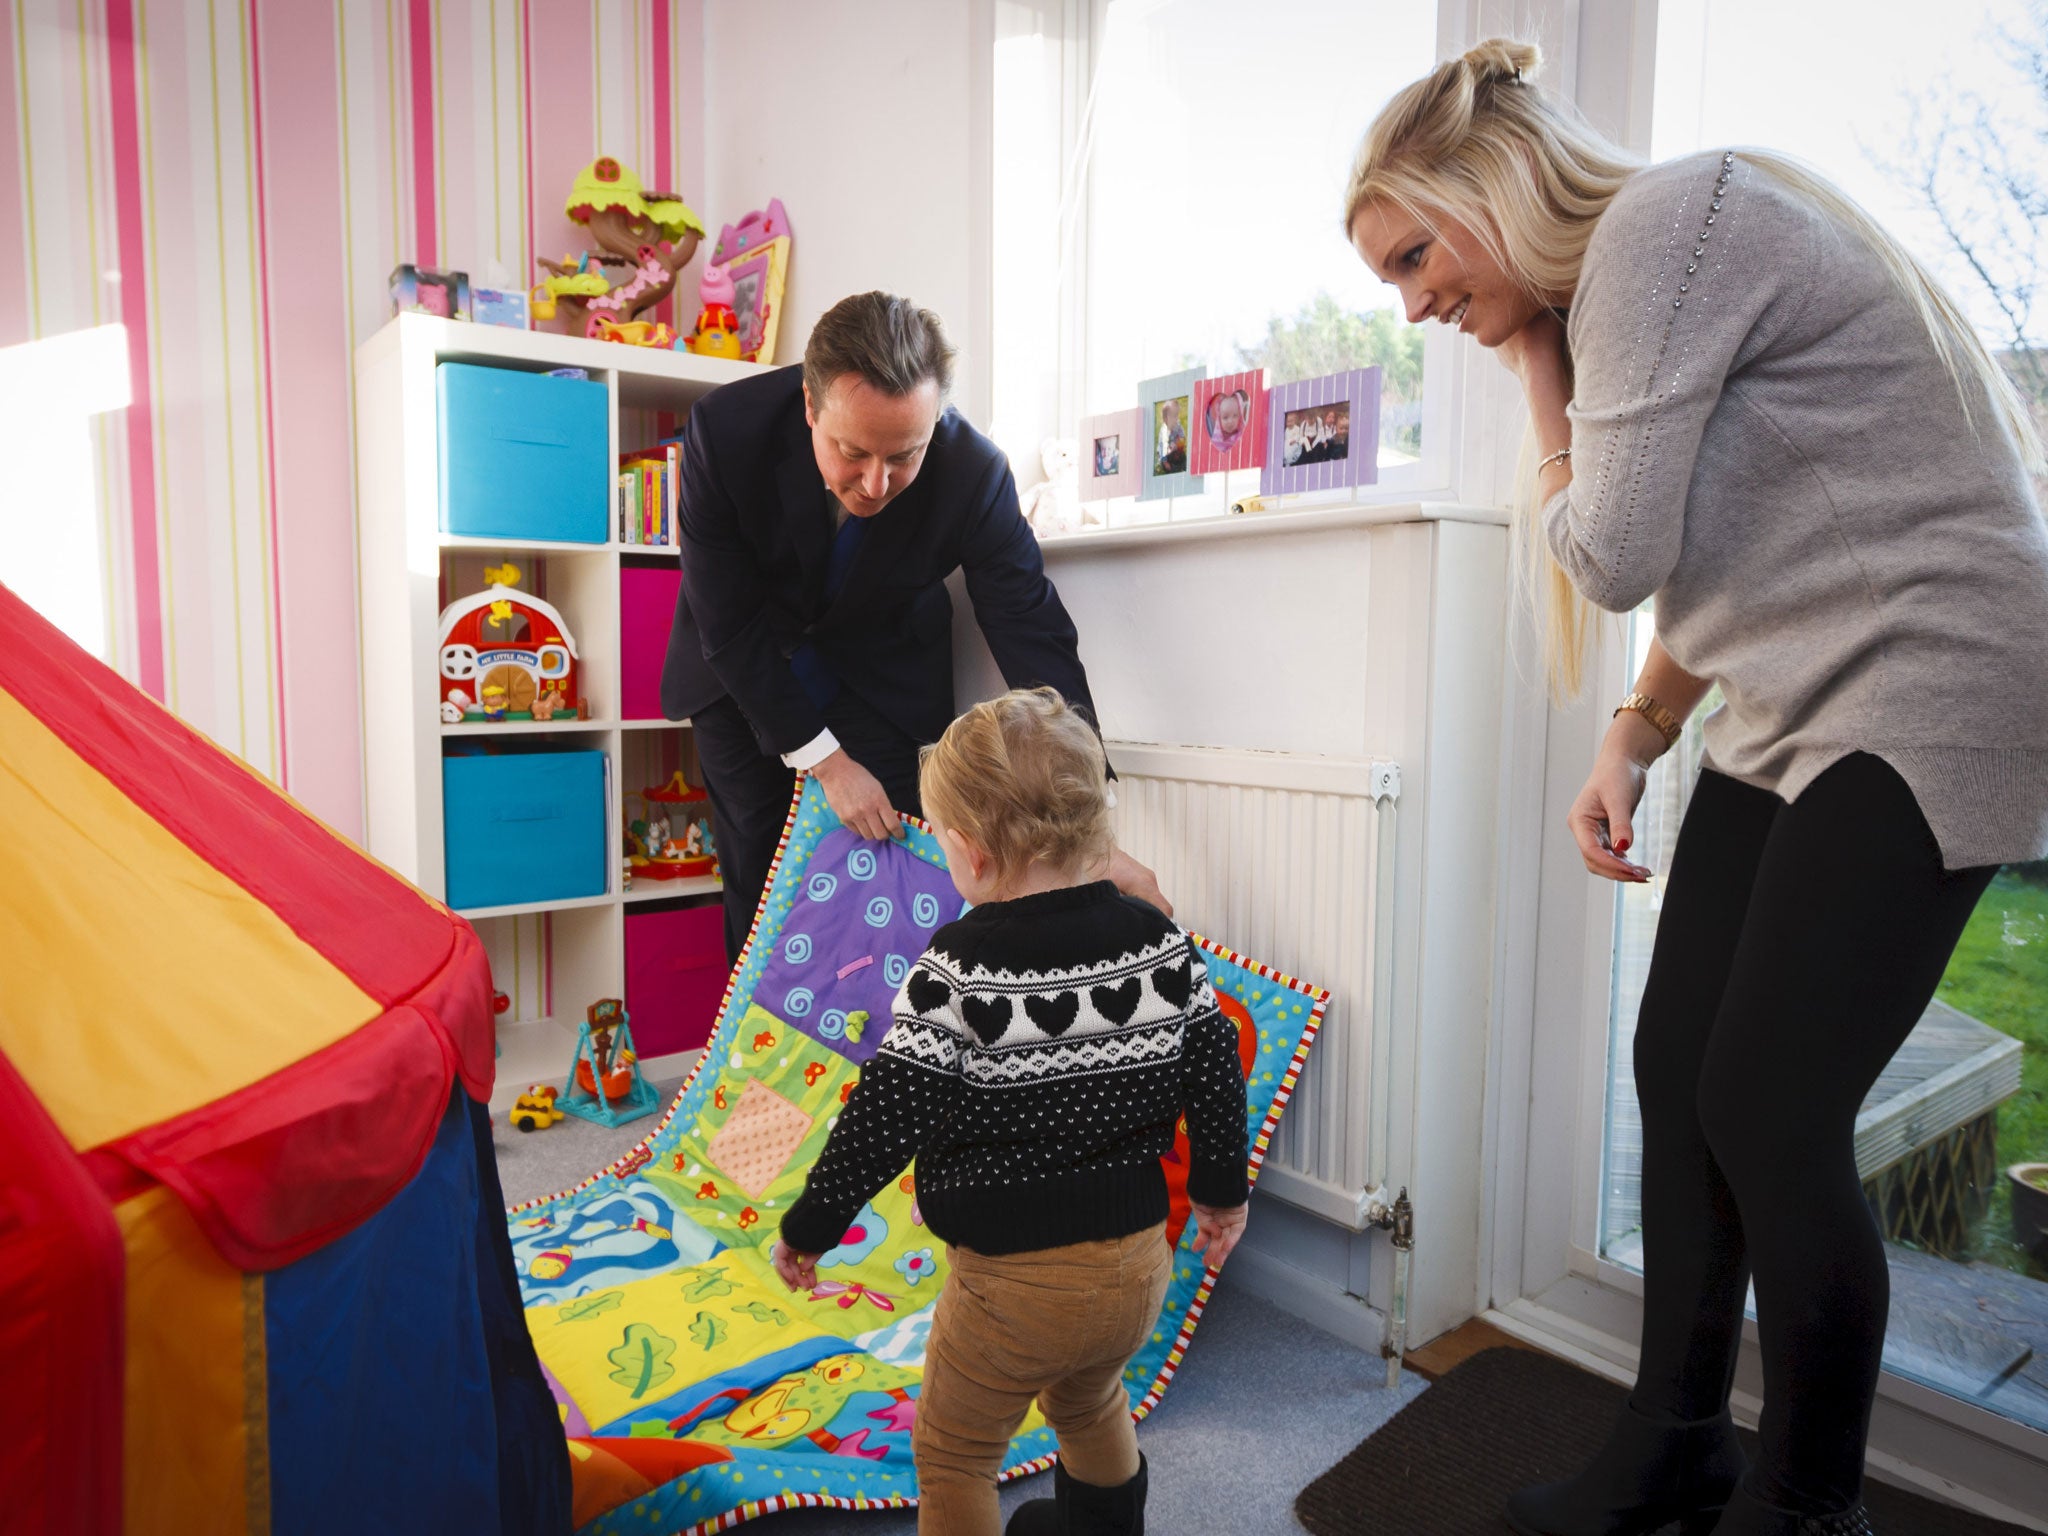 Prime Minister David Cameron with Sharon Ray and her daughter Maisie, 2, during a visit to her home in Southampton, Hampshire which she has bought through the government's Help to Buy scheme